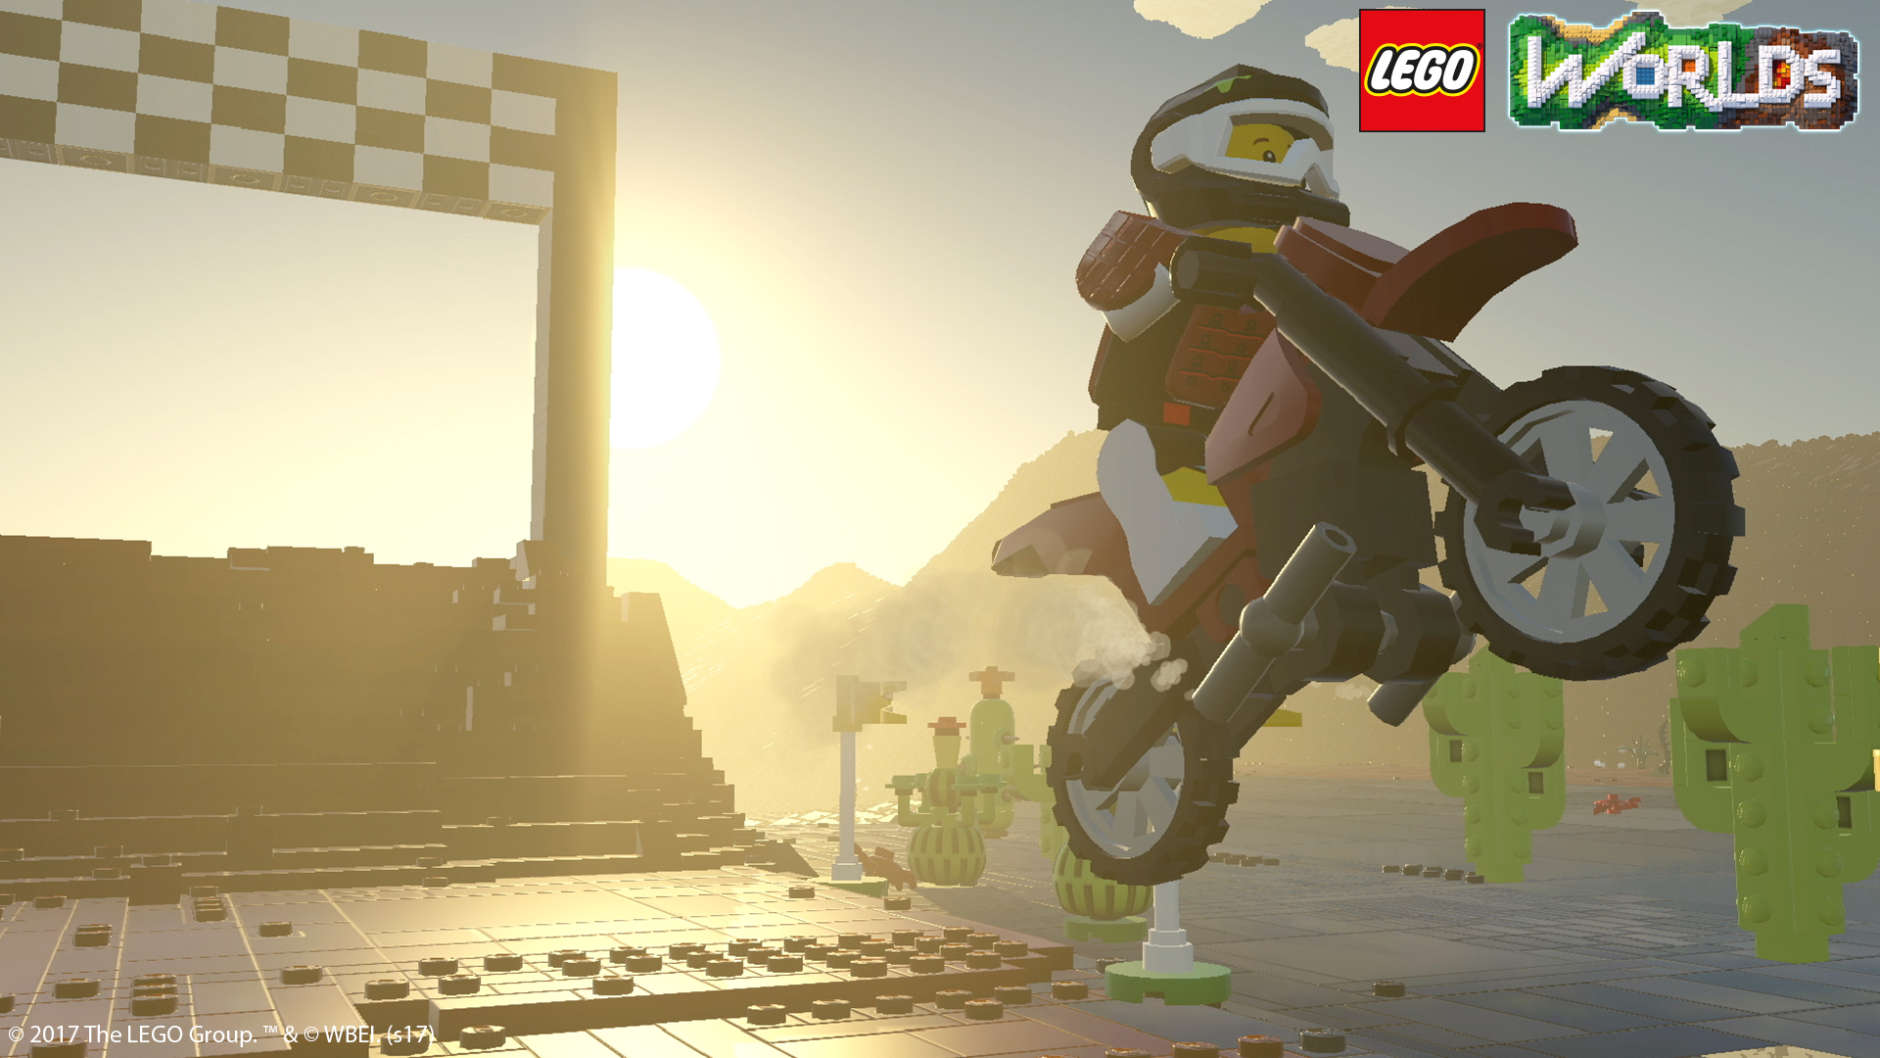 Lego Worlds is fun, but buggy -- and not in the driving sense. (Warner Bros. Interactive)